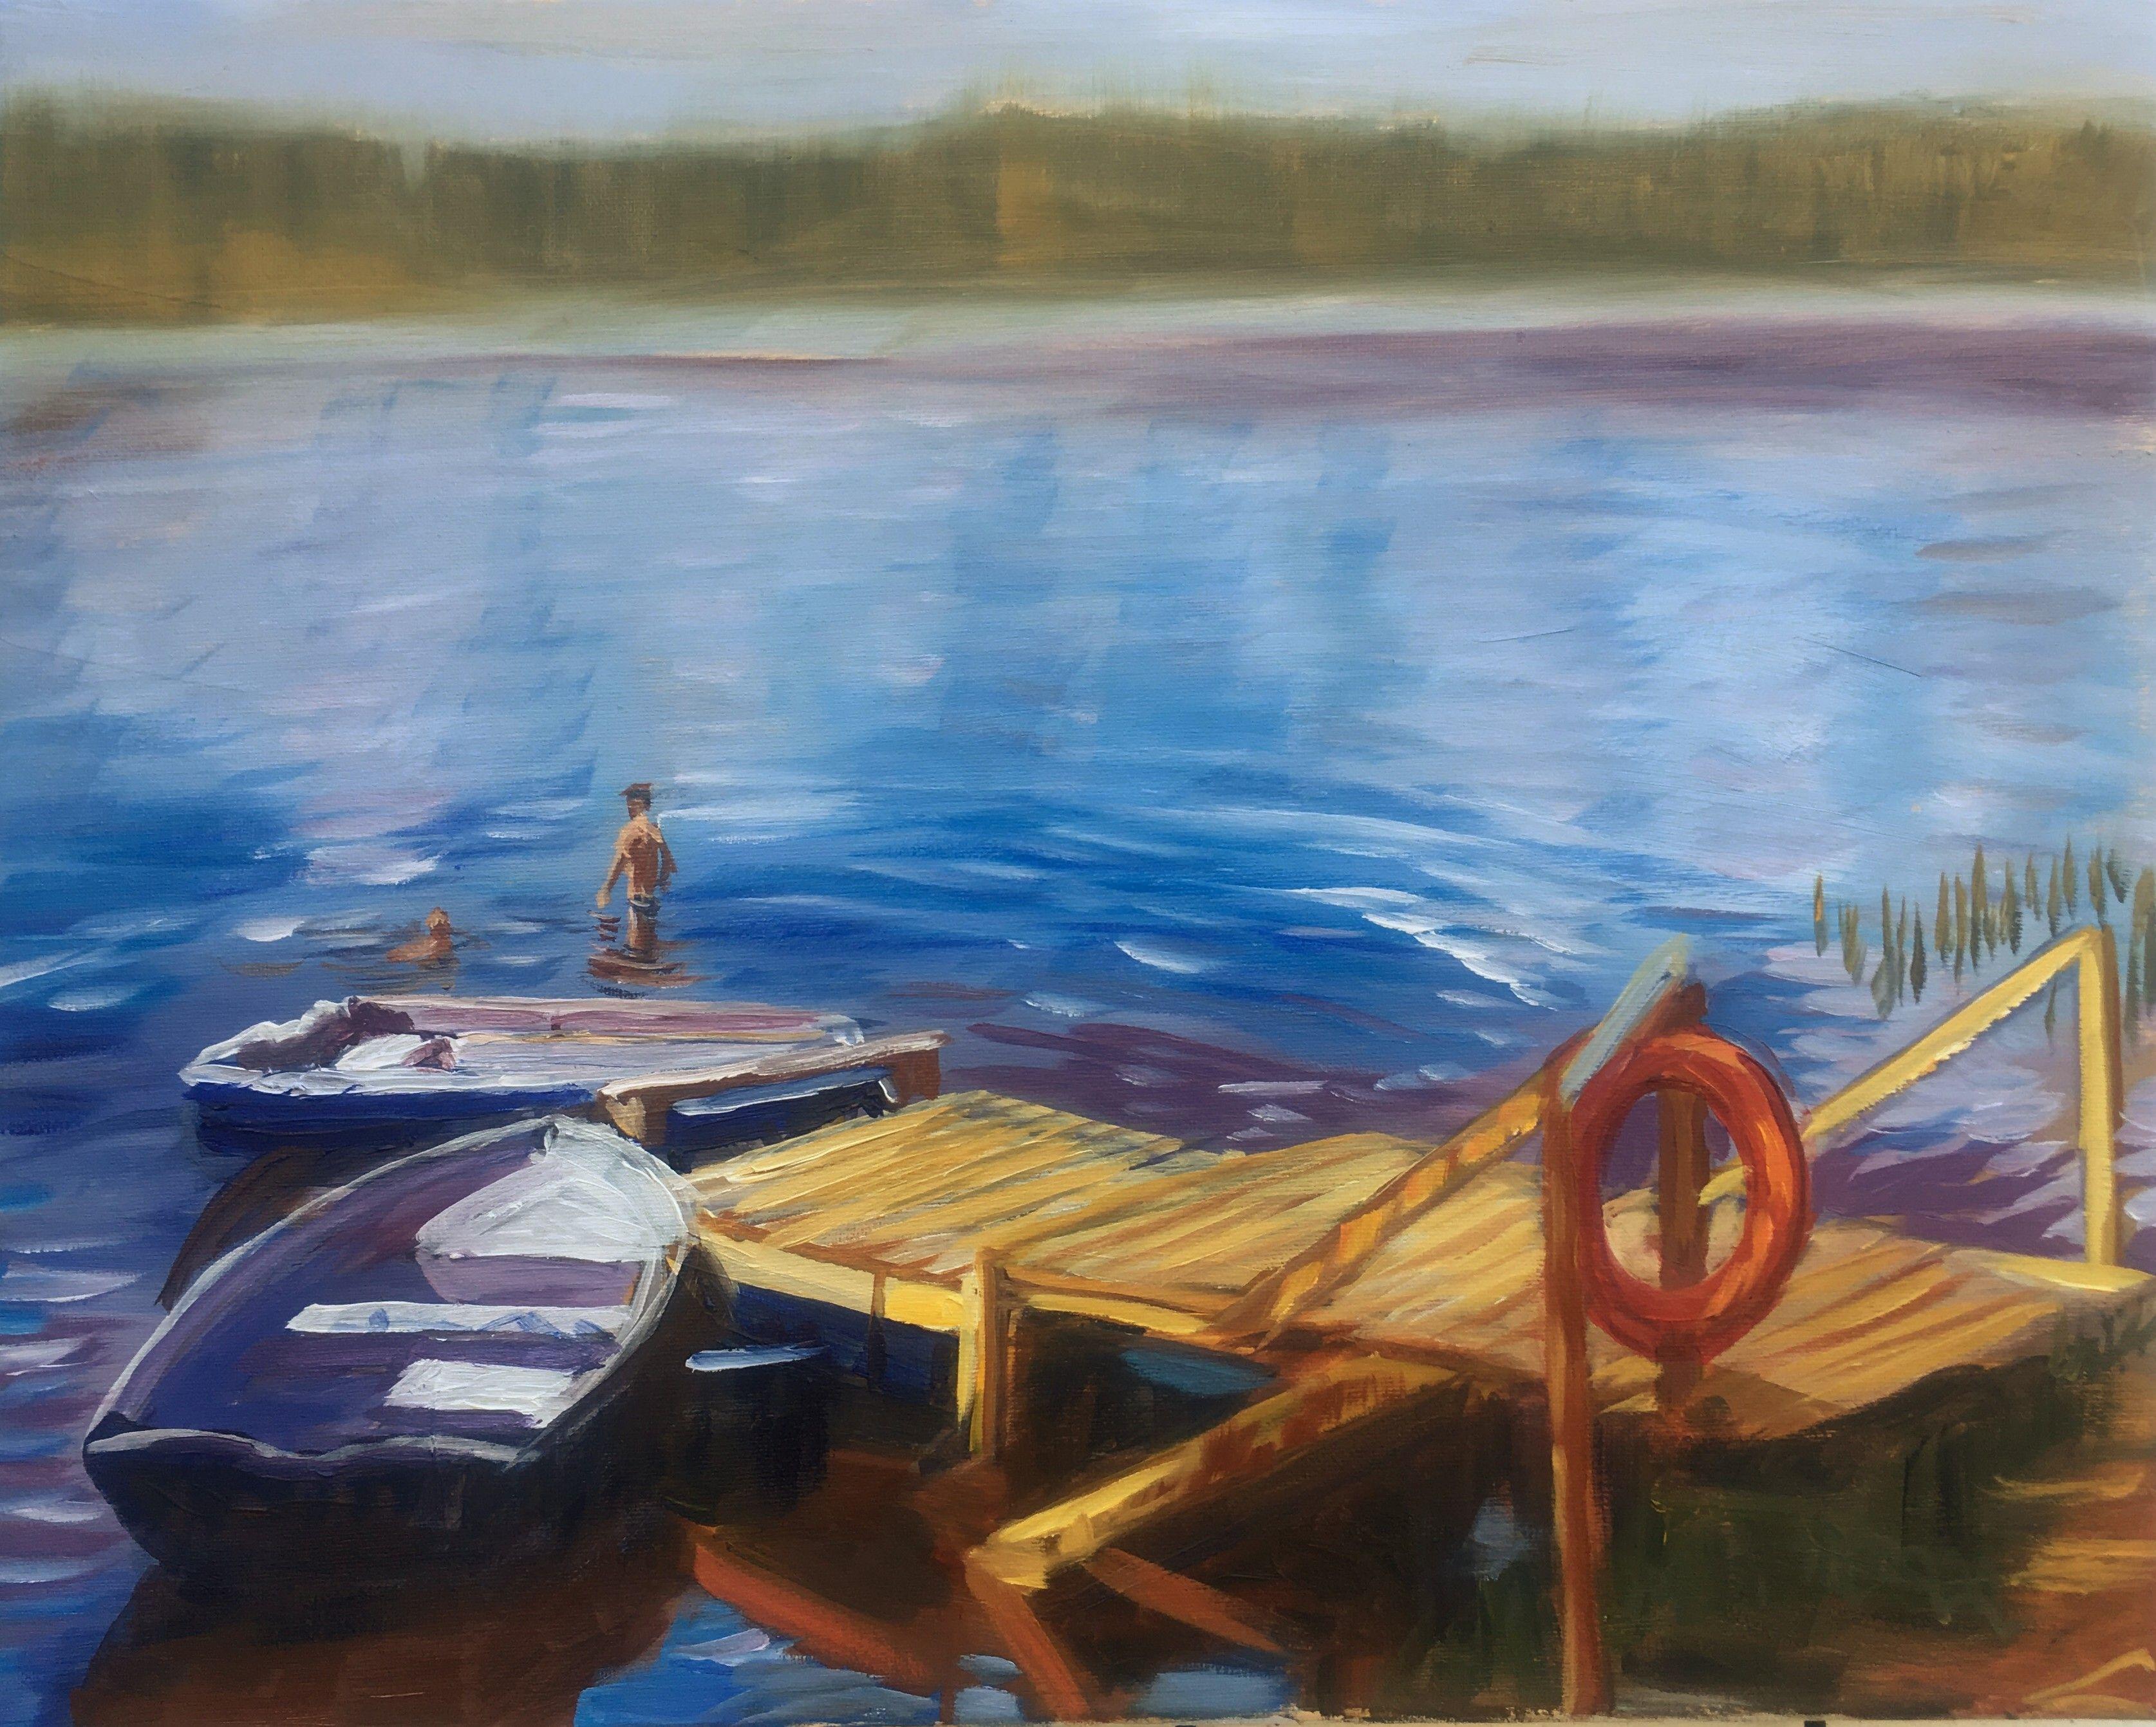 Boats at the lake. Alla prima oil painting with few final touches when dry. Beautiful weather with a big shining sun. And I'm standing there taking it all in. The many spectacular sights jump at my eyes. :: Painting :: Impressionist :: This piece